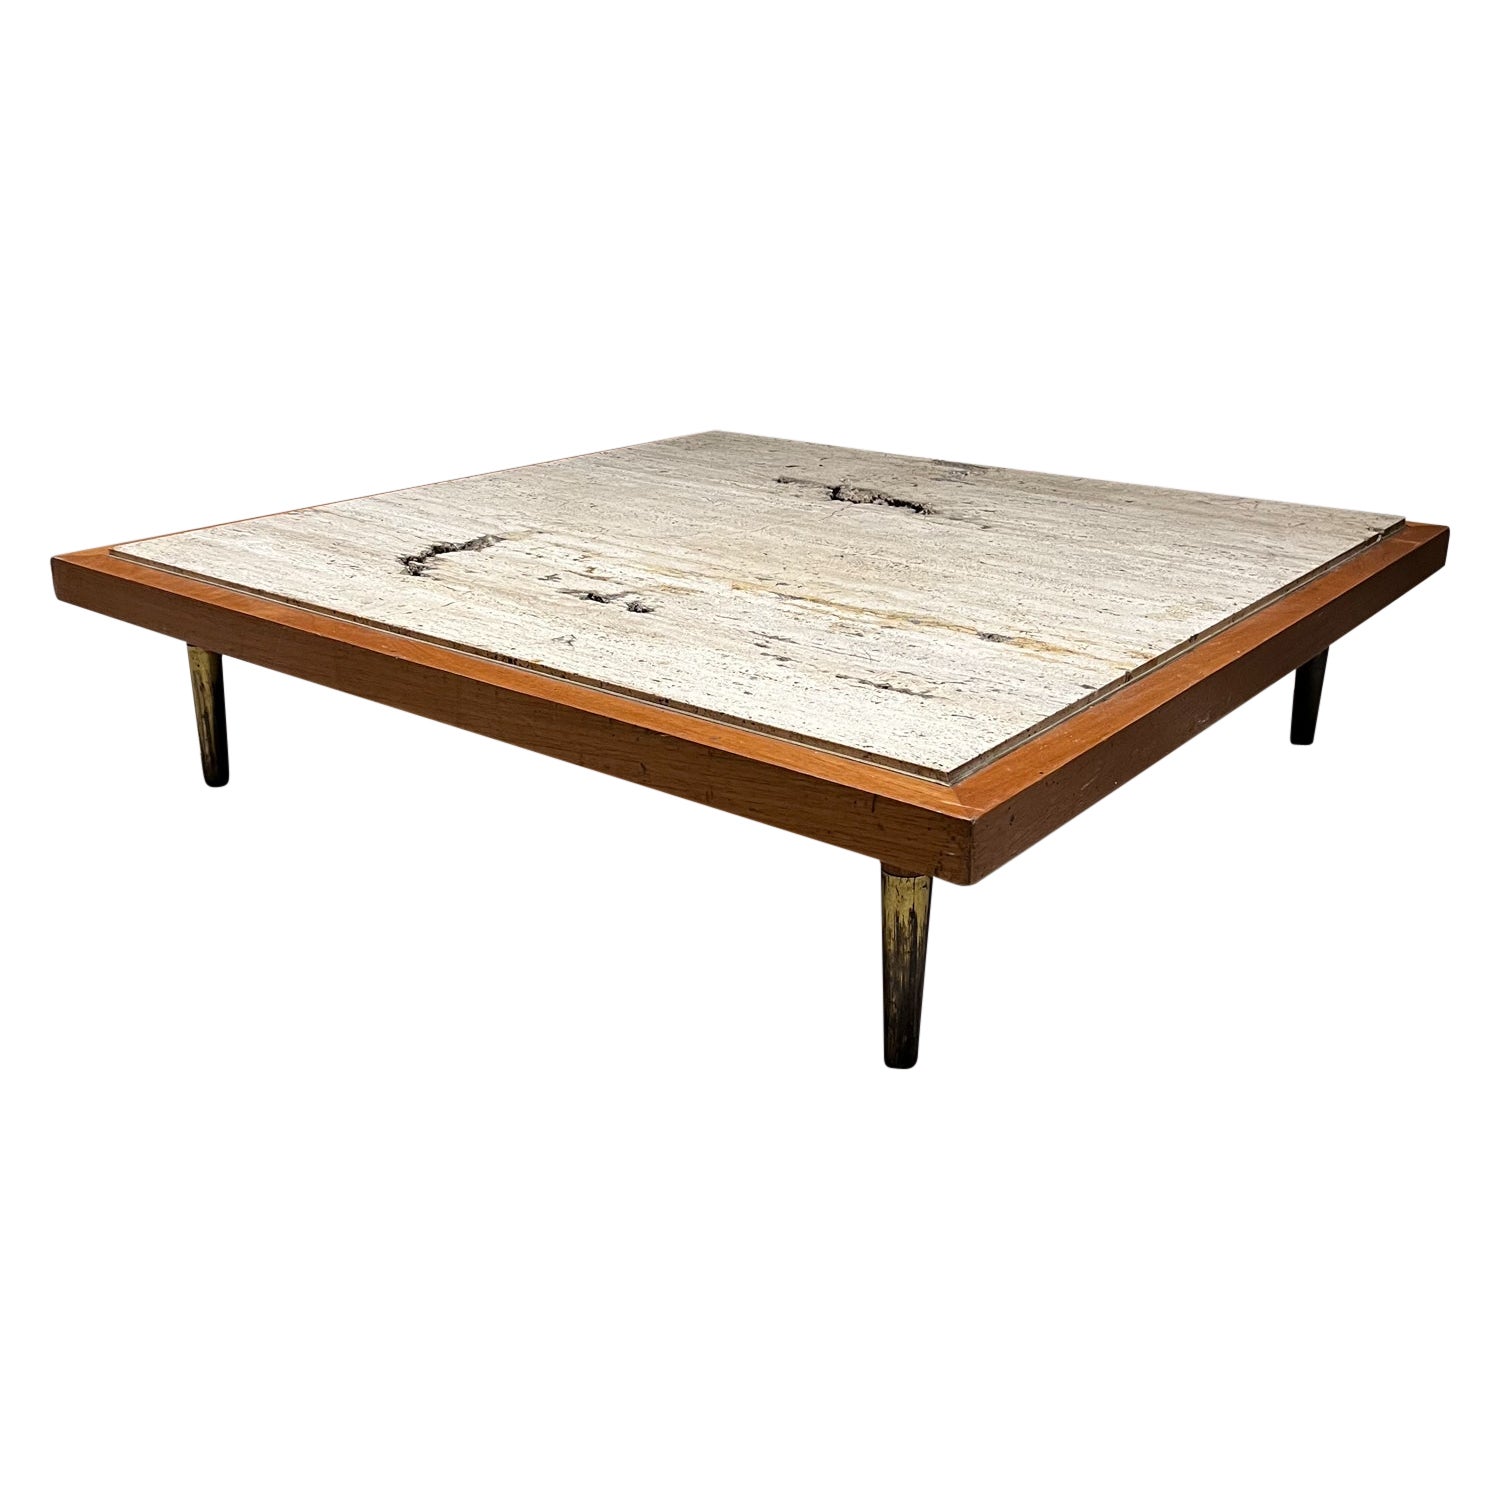 1960s Low Profile Square Coffee Table Travertine and Mahogany 